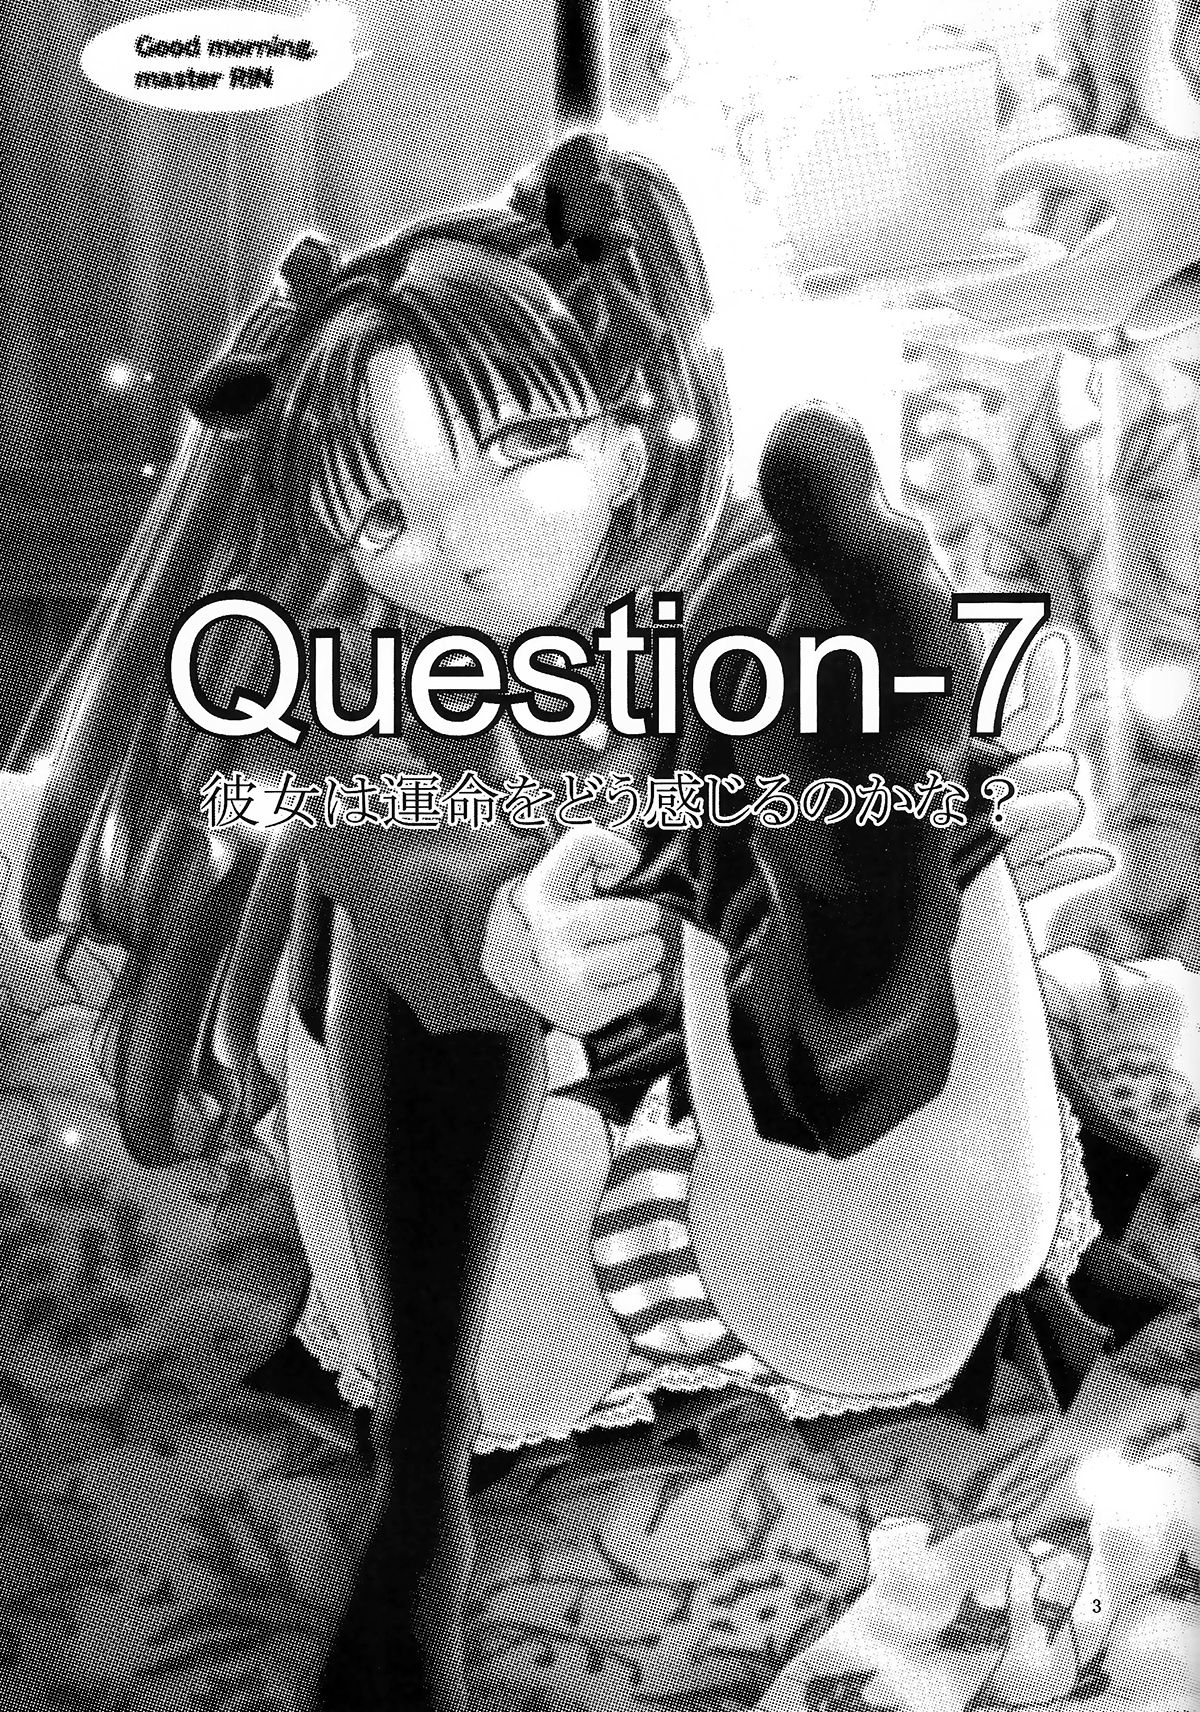 (SC24) [Takeda Syouten (Takeda Sora)] Question-7 (Fate/stay night) [Chinese] (サンクリ24) [武田商店 (武田空)] Question-7 (Fate/stay night) [中国翻訳]